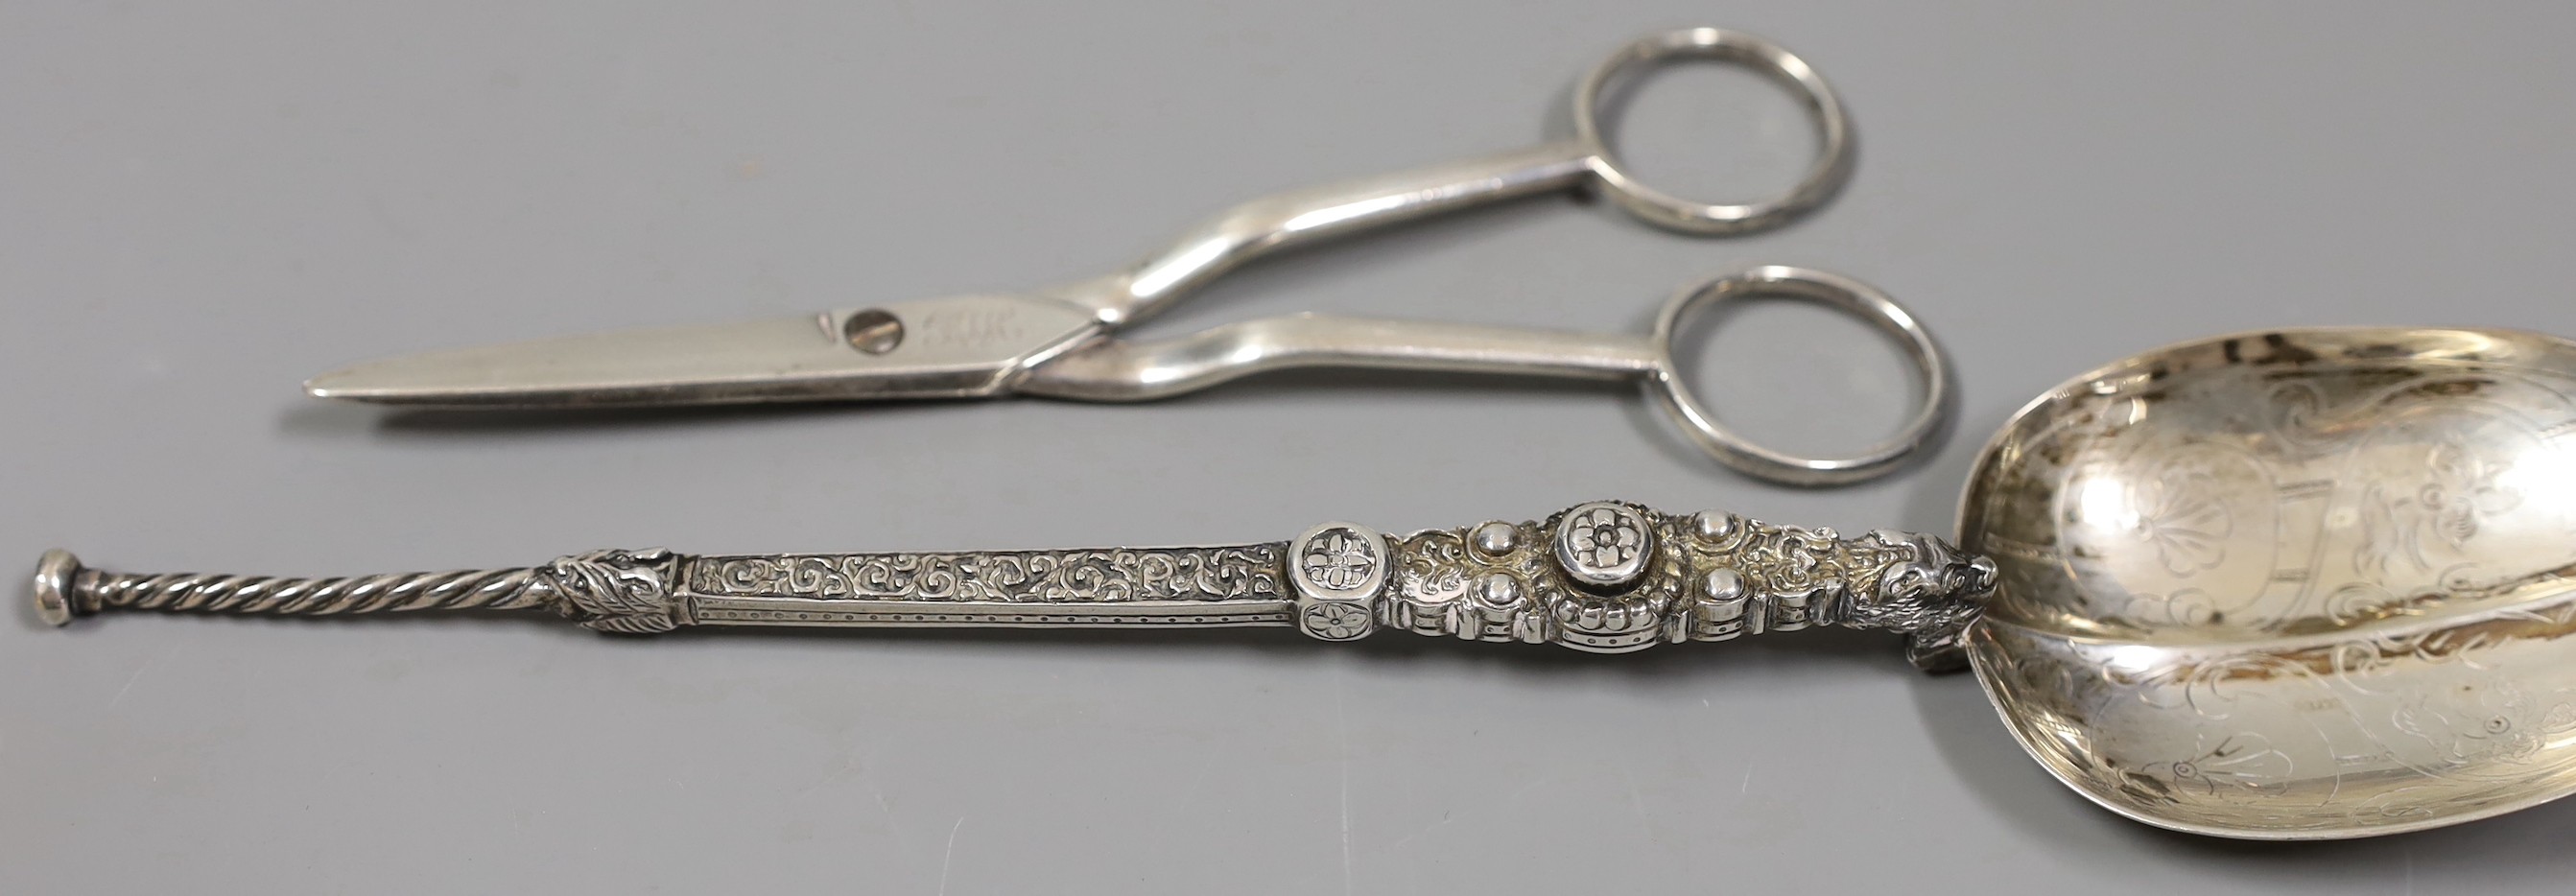 Pair of George III silver grape scissors, by Eley & Fearn, London, 1818 and a George V silver replica of the anointing spoon, Goldsmiths & Silversmiths Co Ltd, London 1910, 166 grams.